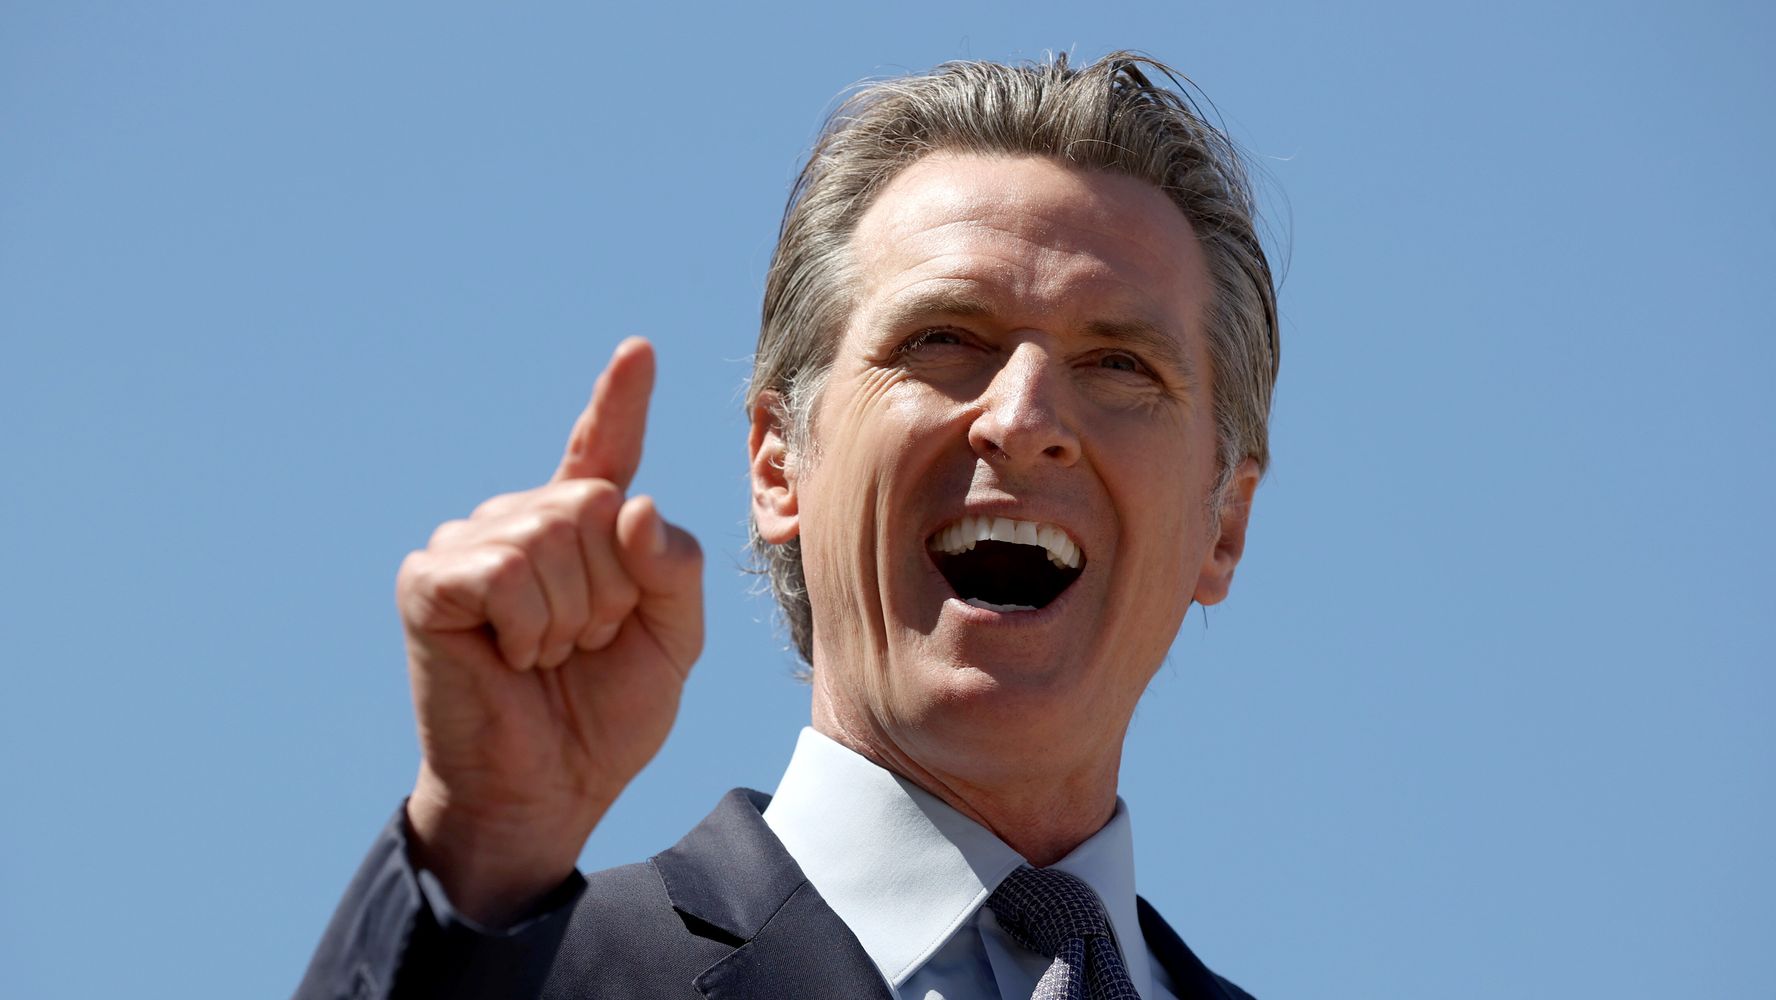 Newsom Blasts Judge As 'Wholly-Owned Subsidiary Of Gun Lobby' After Weapons Ruling